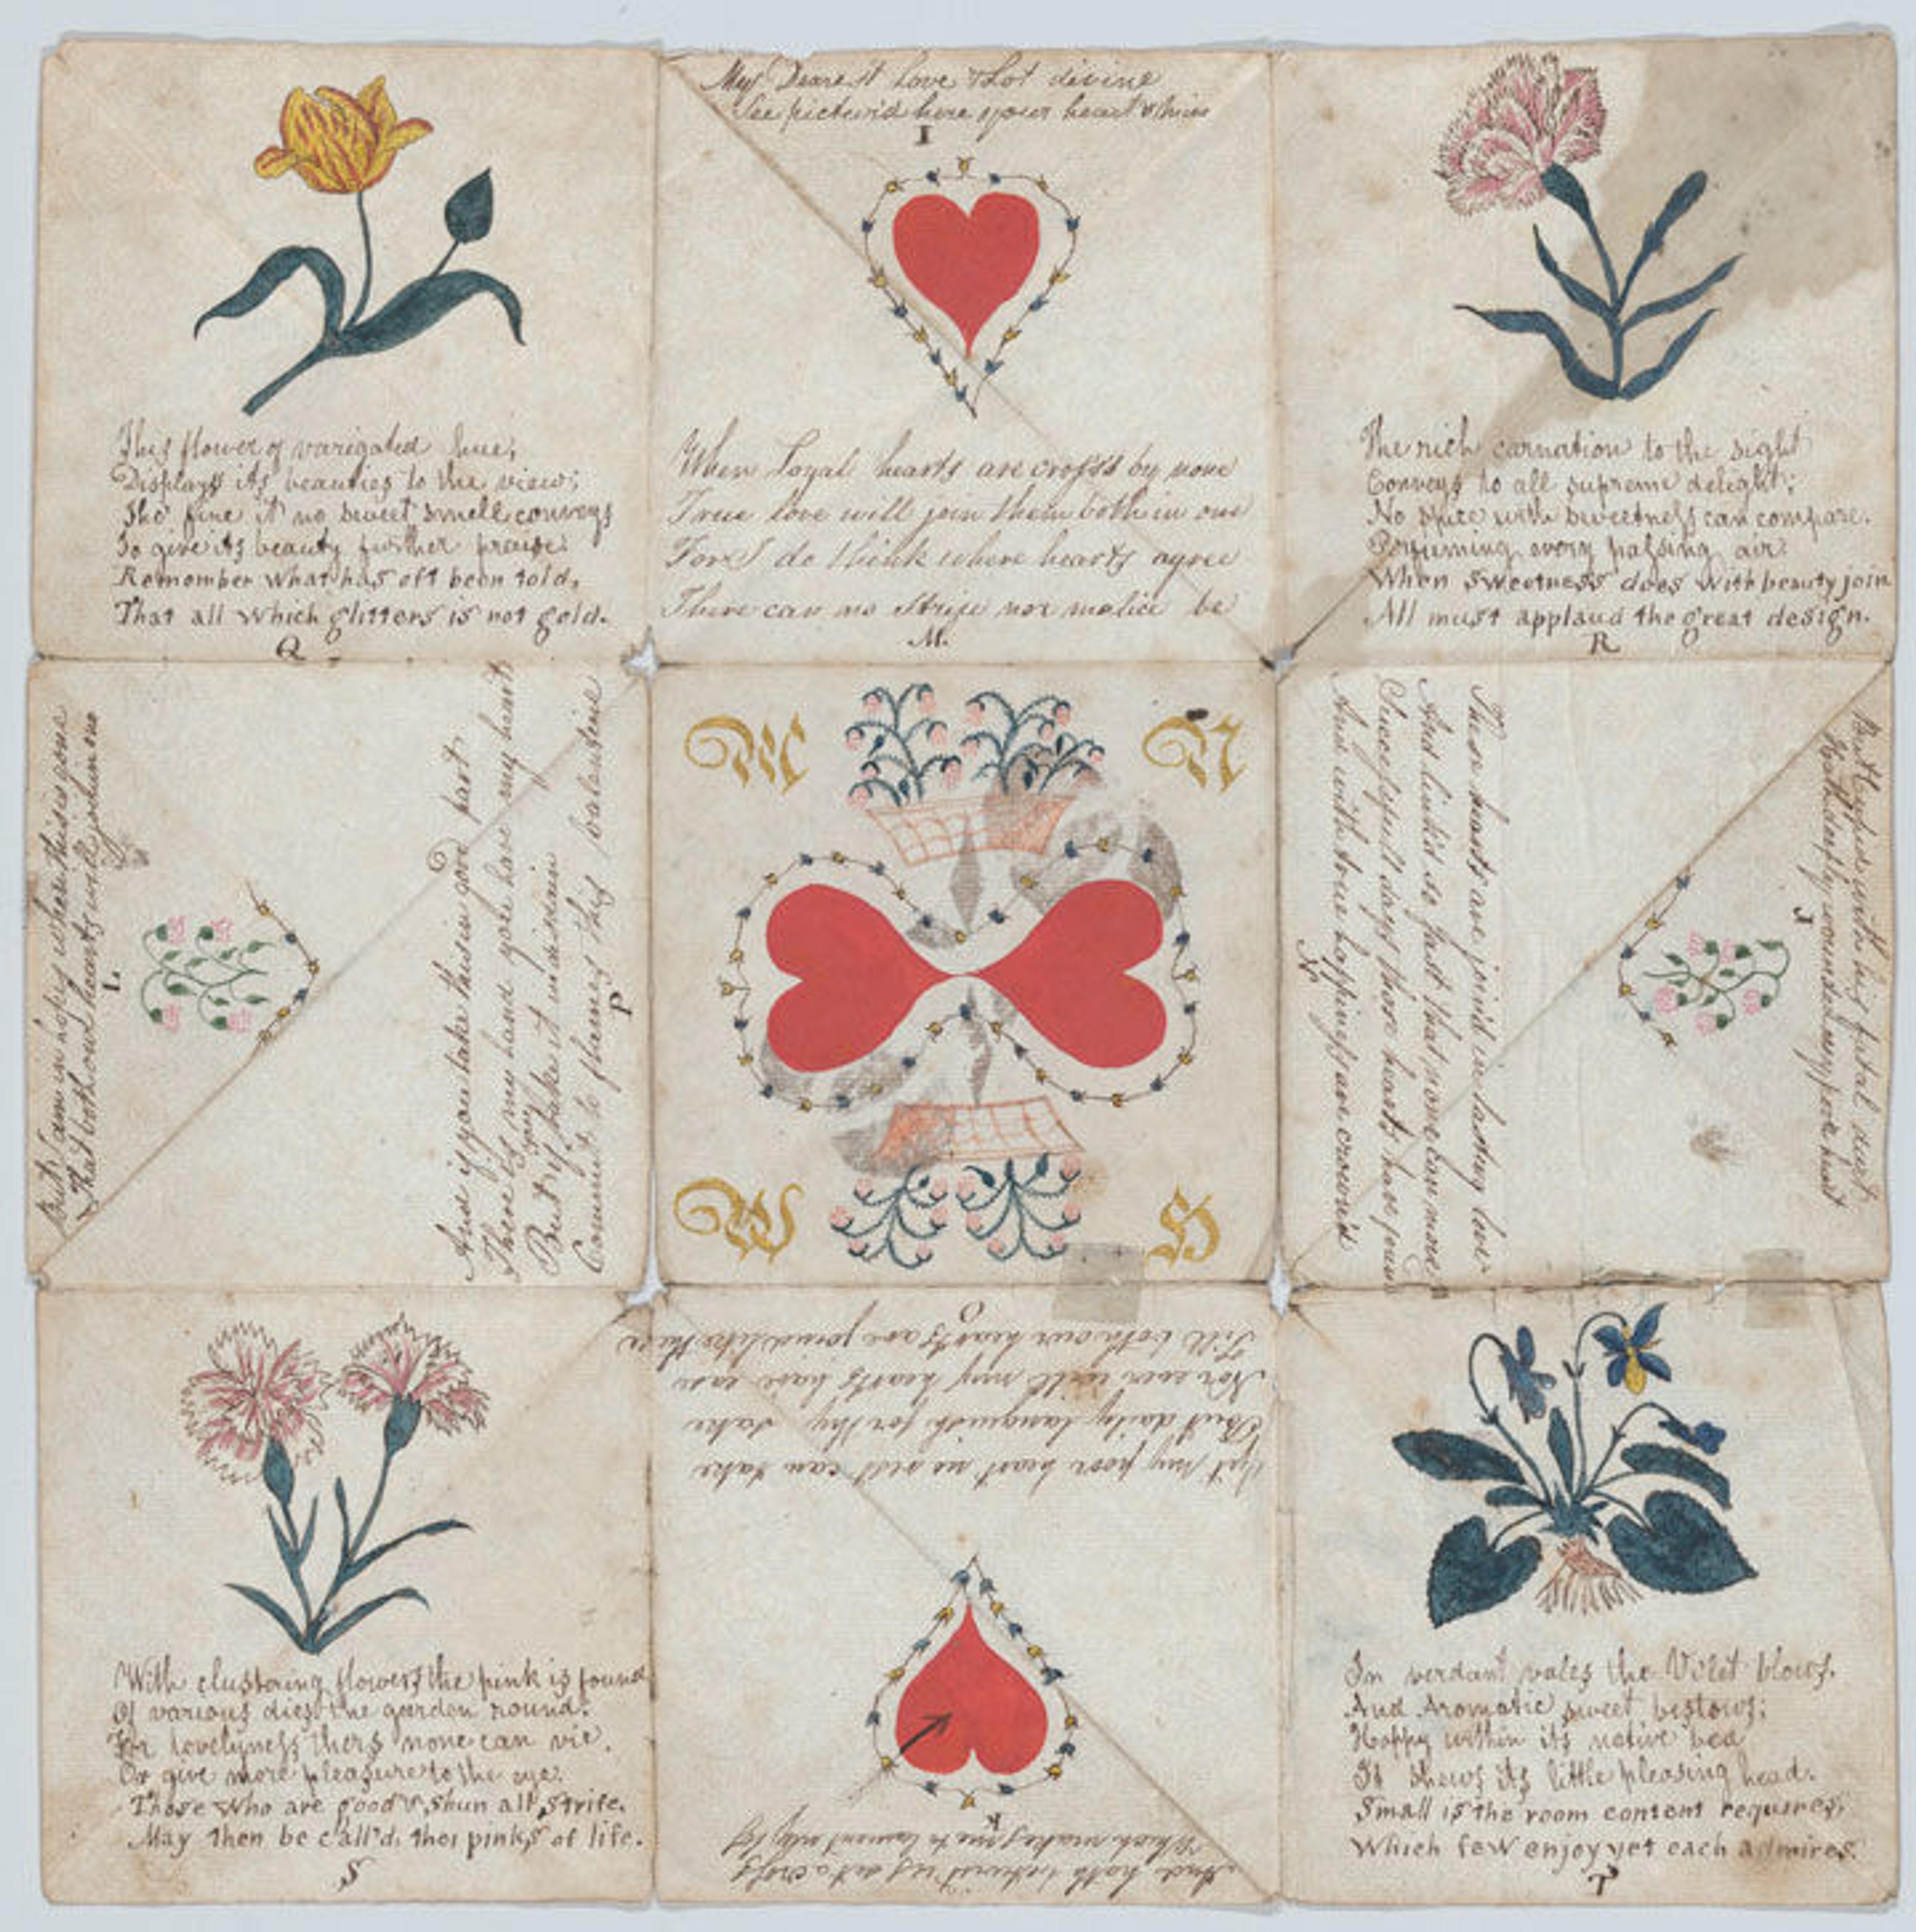 A 19th-century British puzzle-purse valentine: nine individual panels each showing a series of flowers, hearts, and poetry